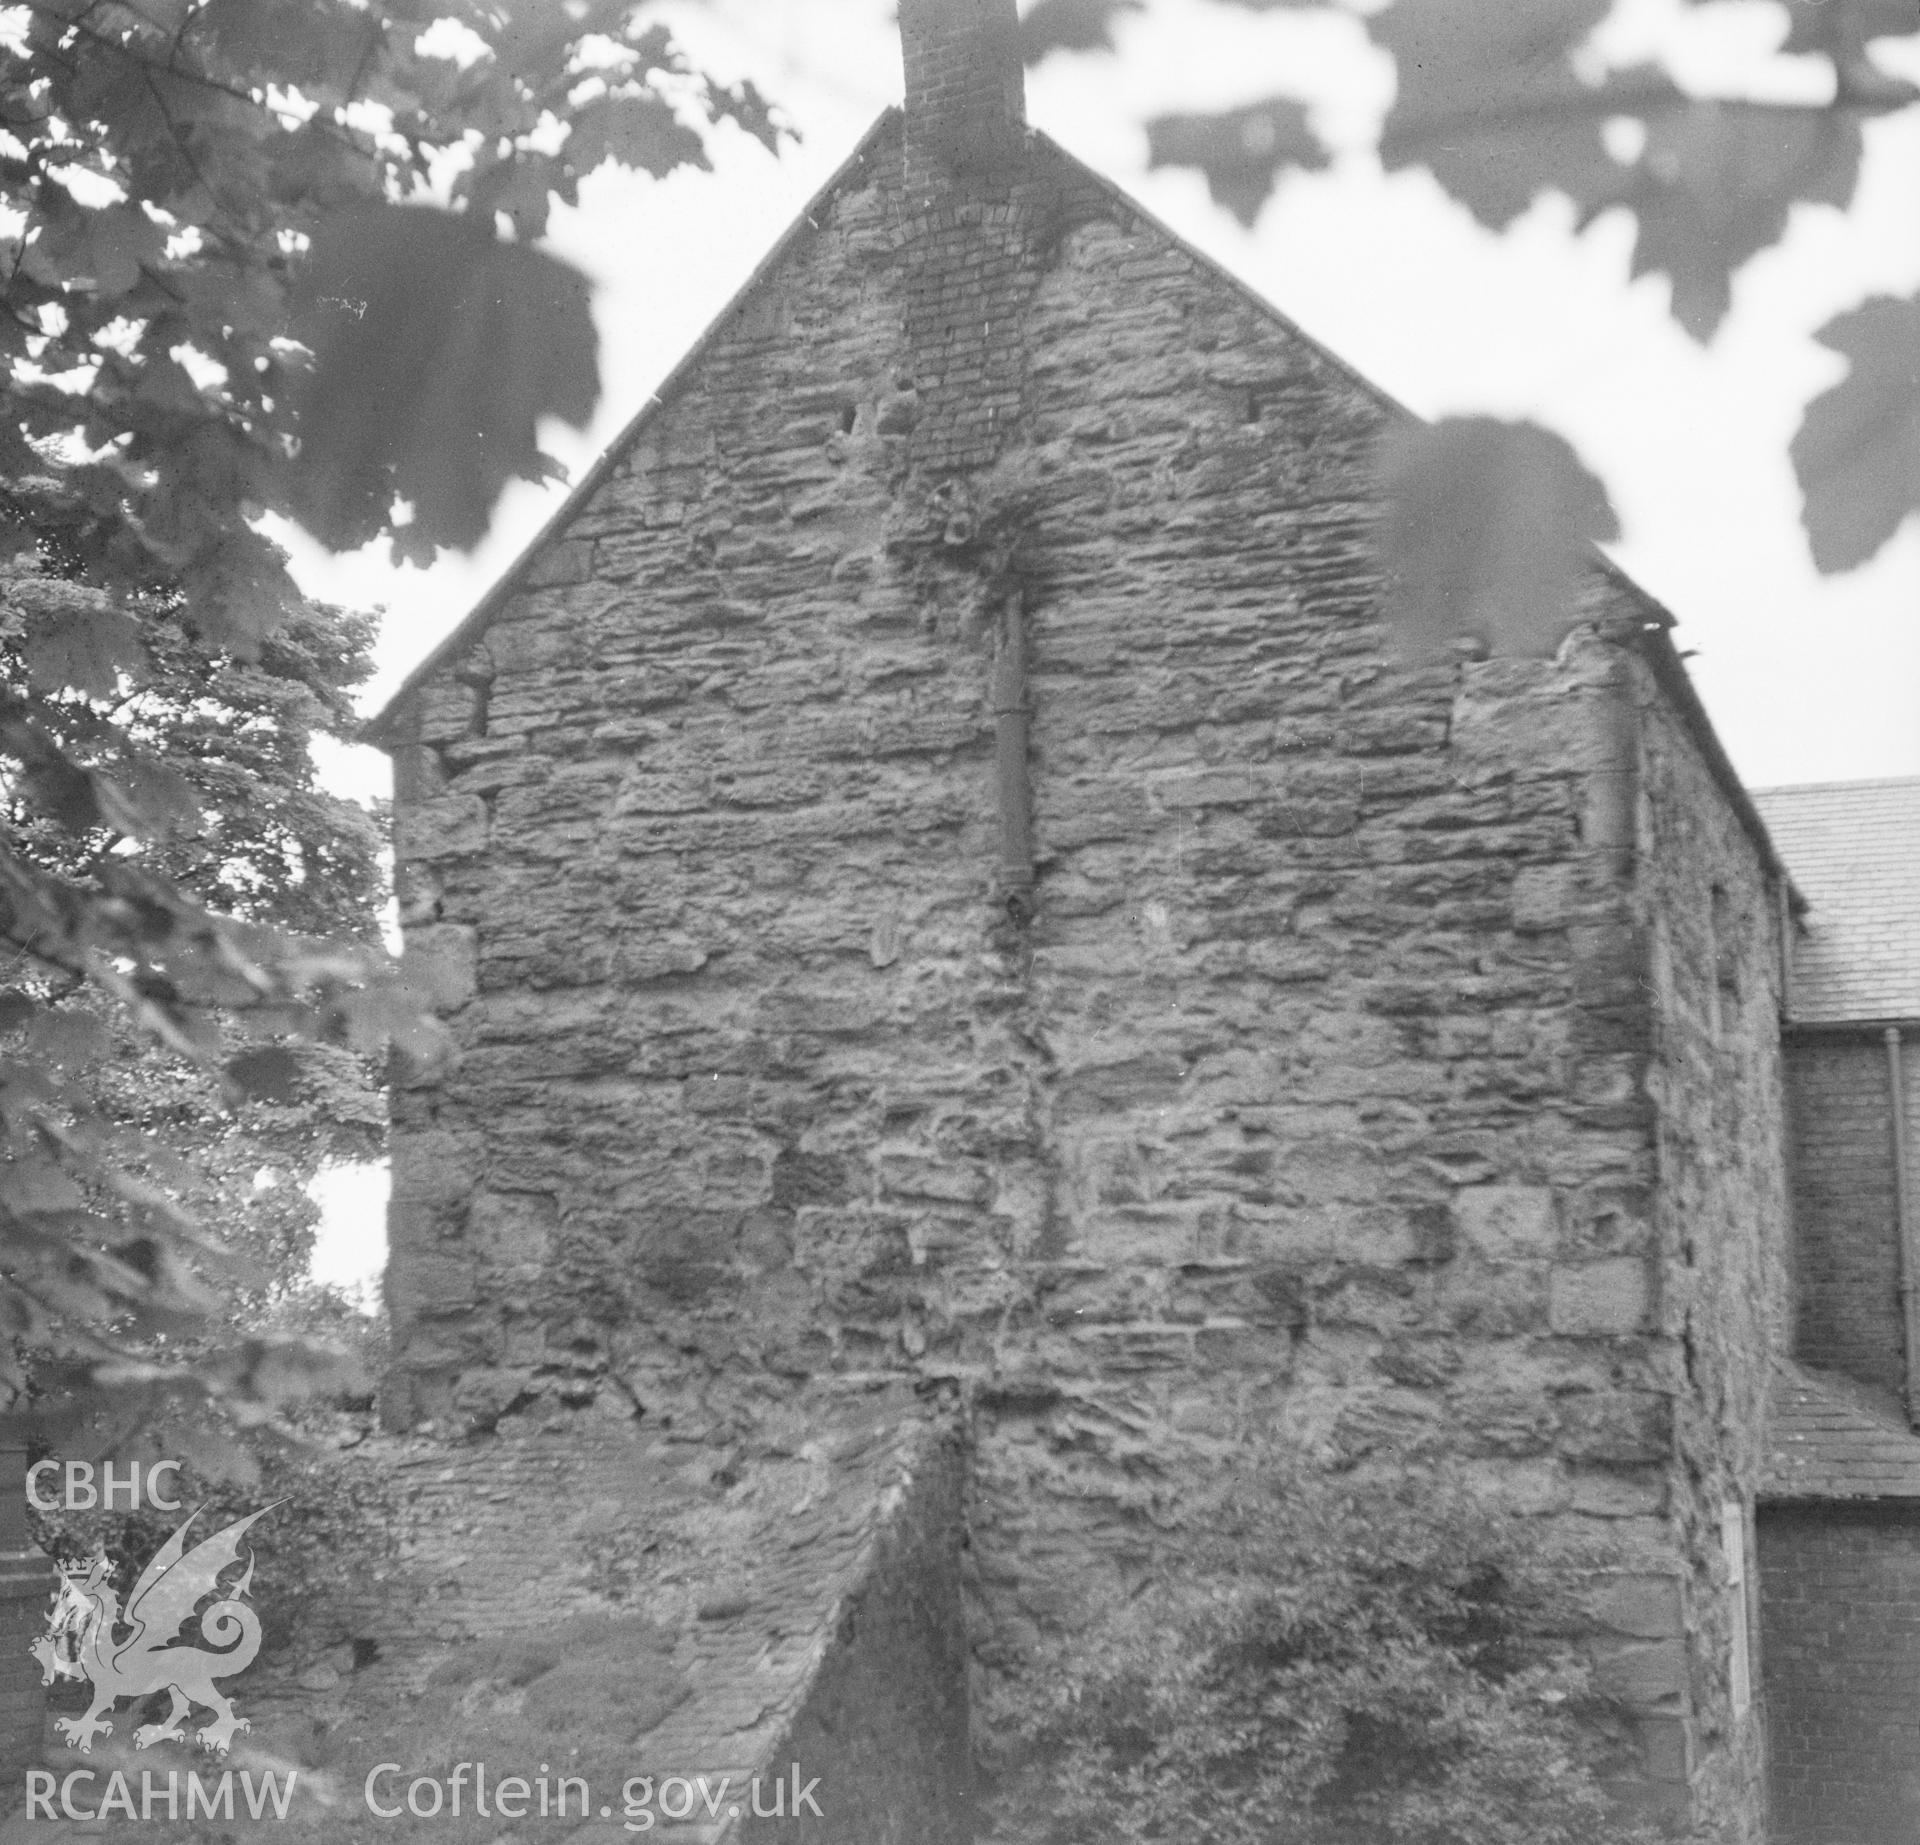 Digital copy of a black and white nitrate negative showing exterior side elevation at Llyseurgain, Northop.